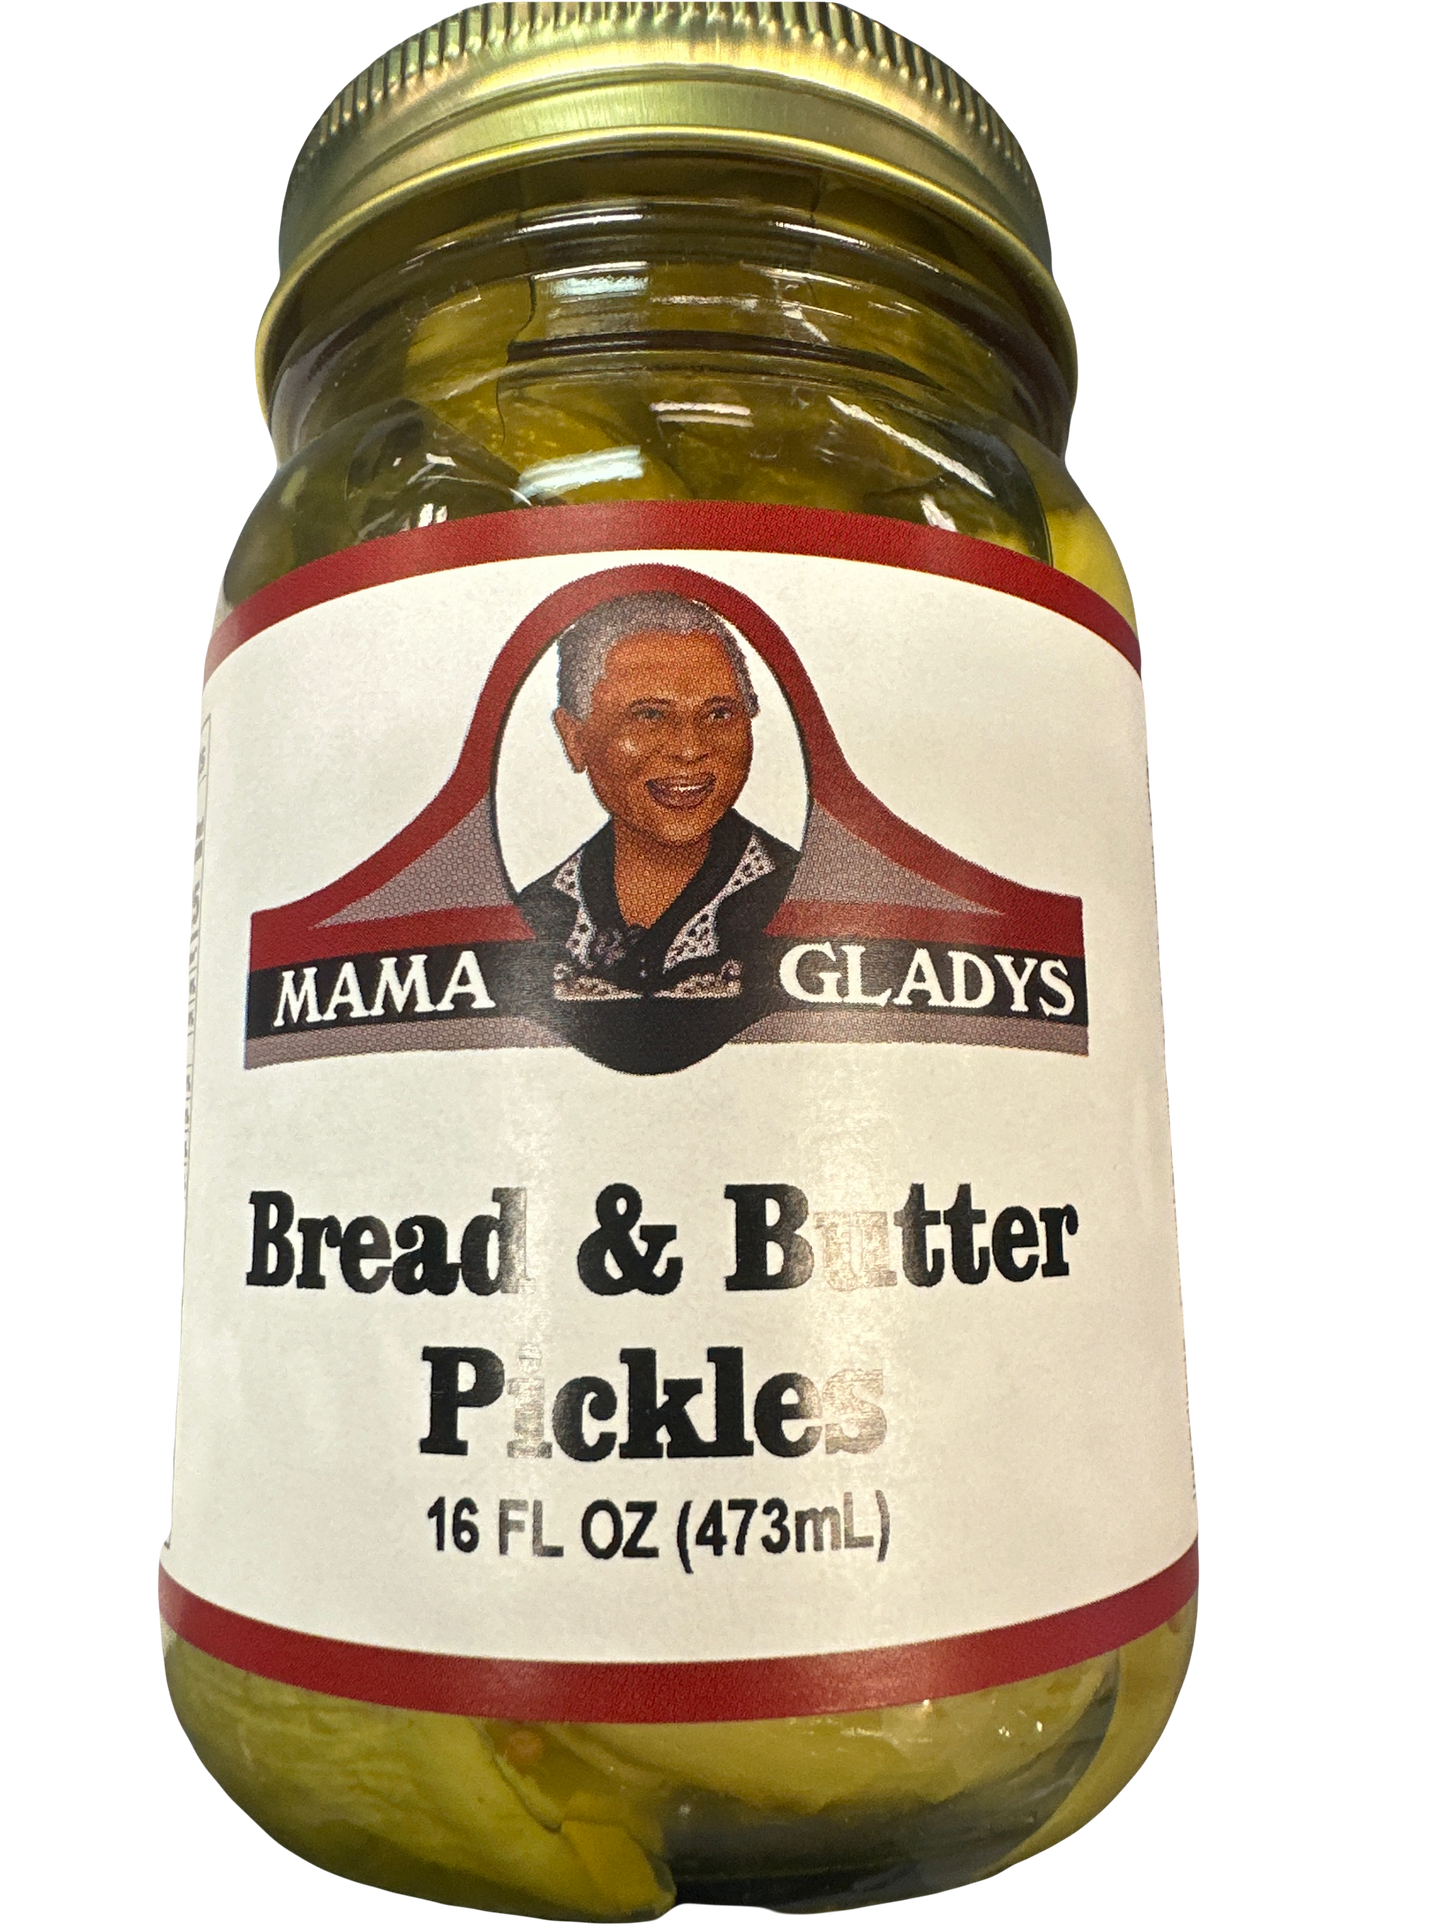 Mama Gladys Bread N' Butter Pickles 16 oz.